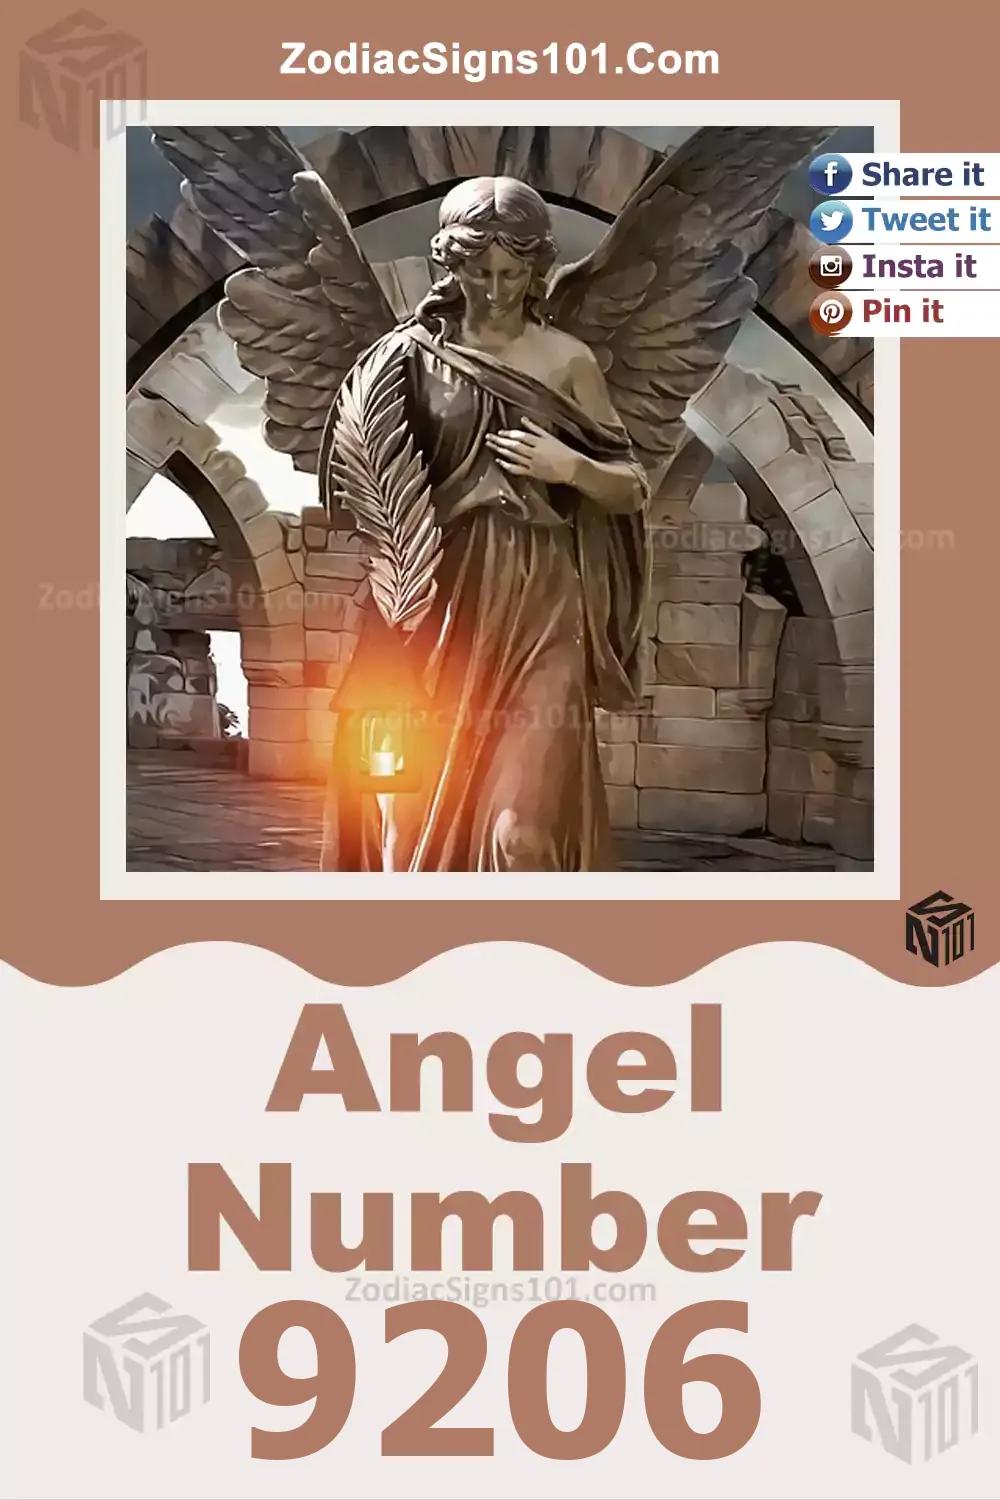 9206 Angel Number Meaning